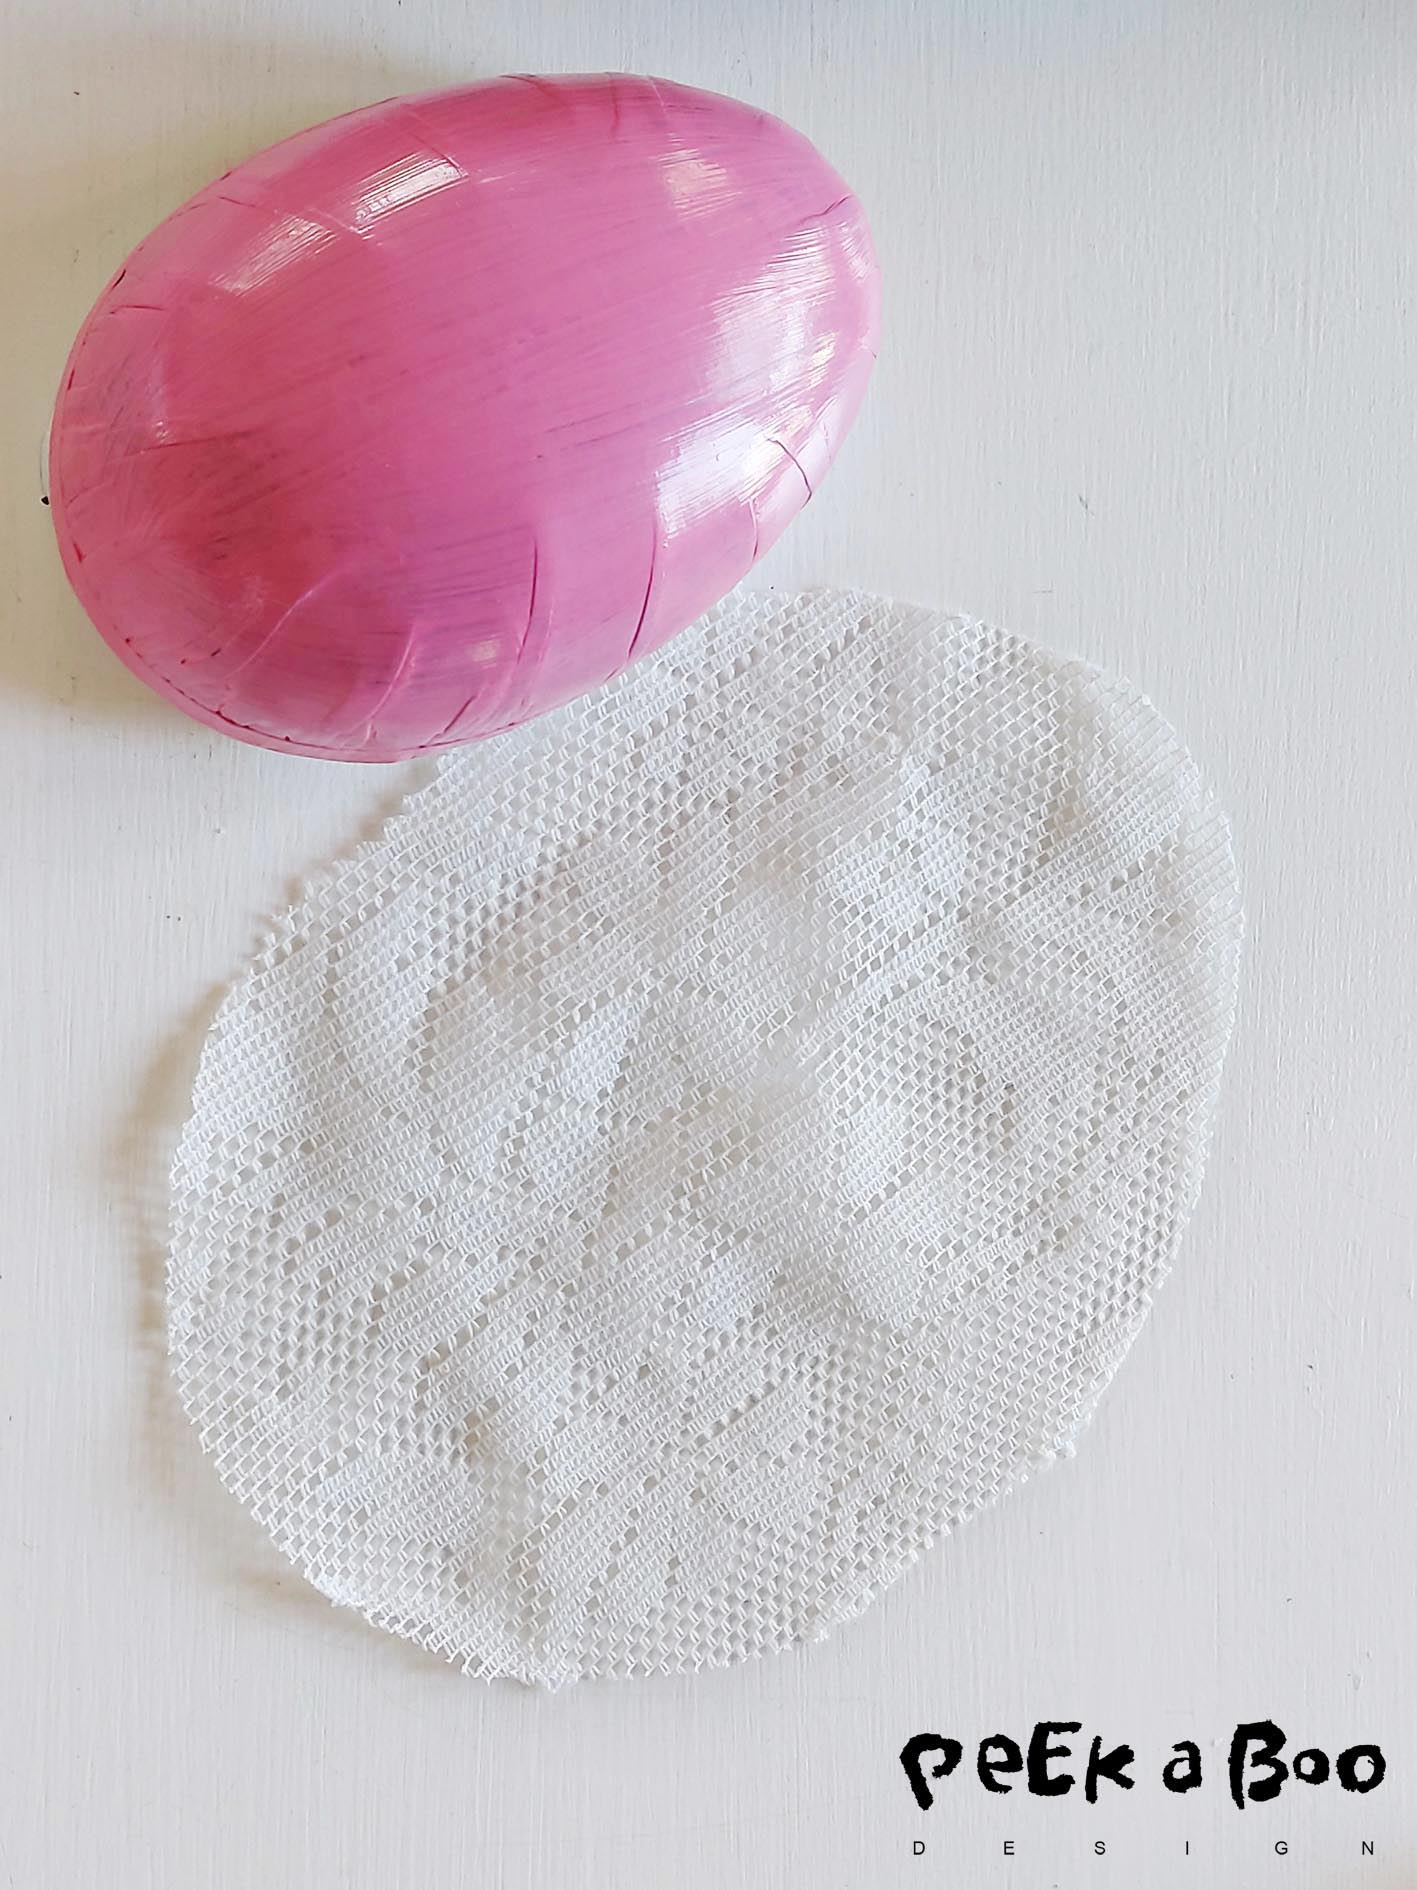 Cut a piece of lace that is about 2-3 cm. bigger than the egg.